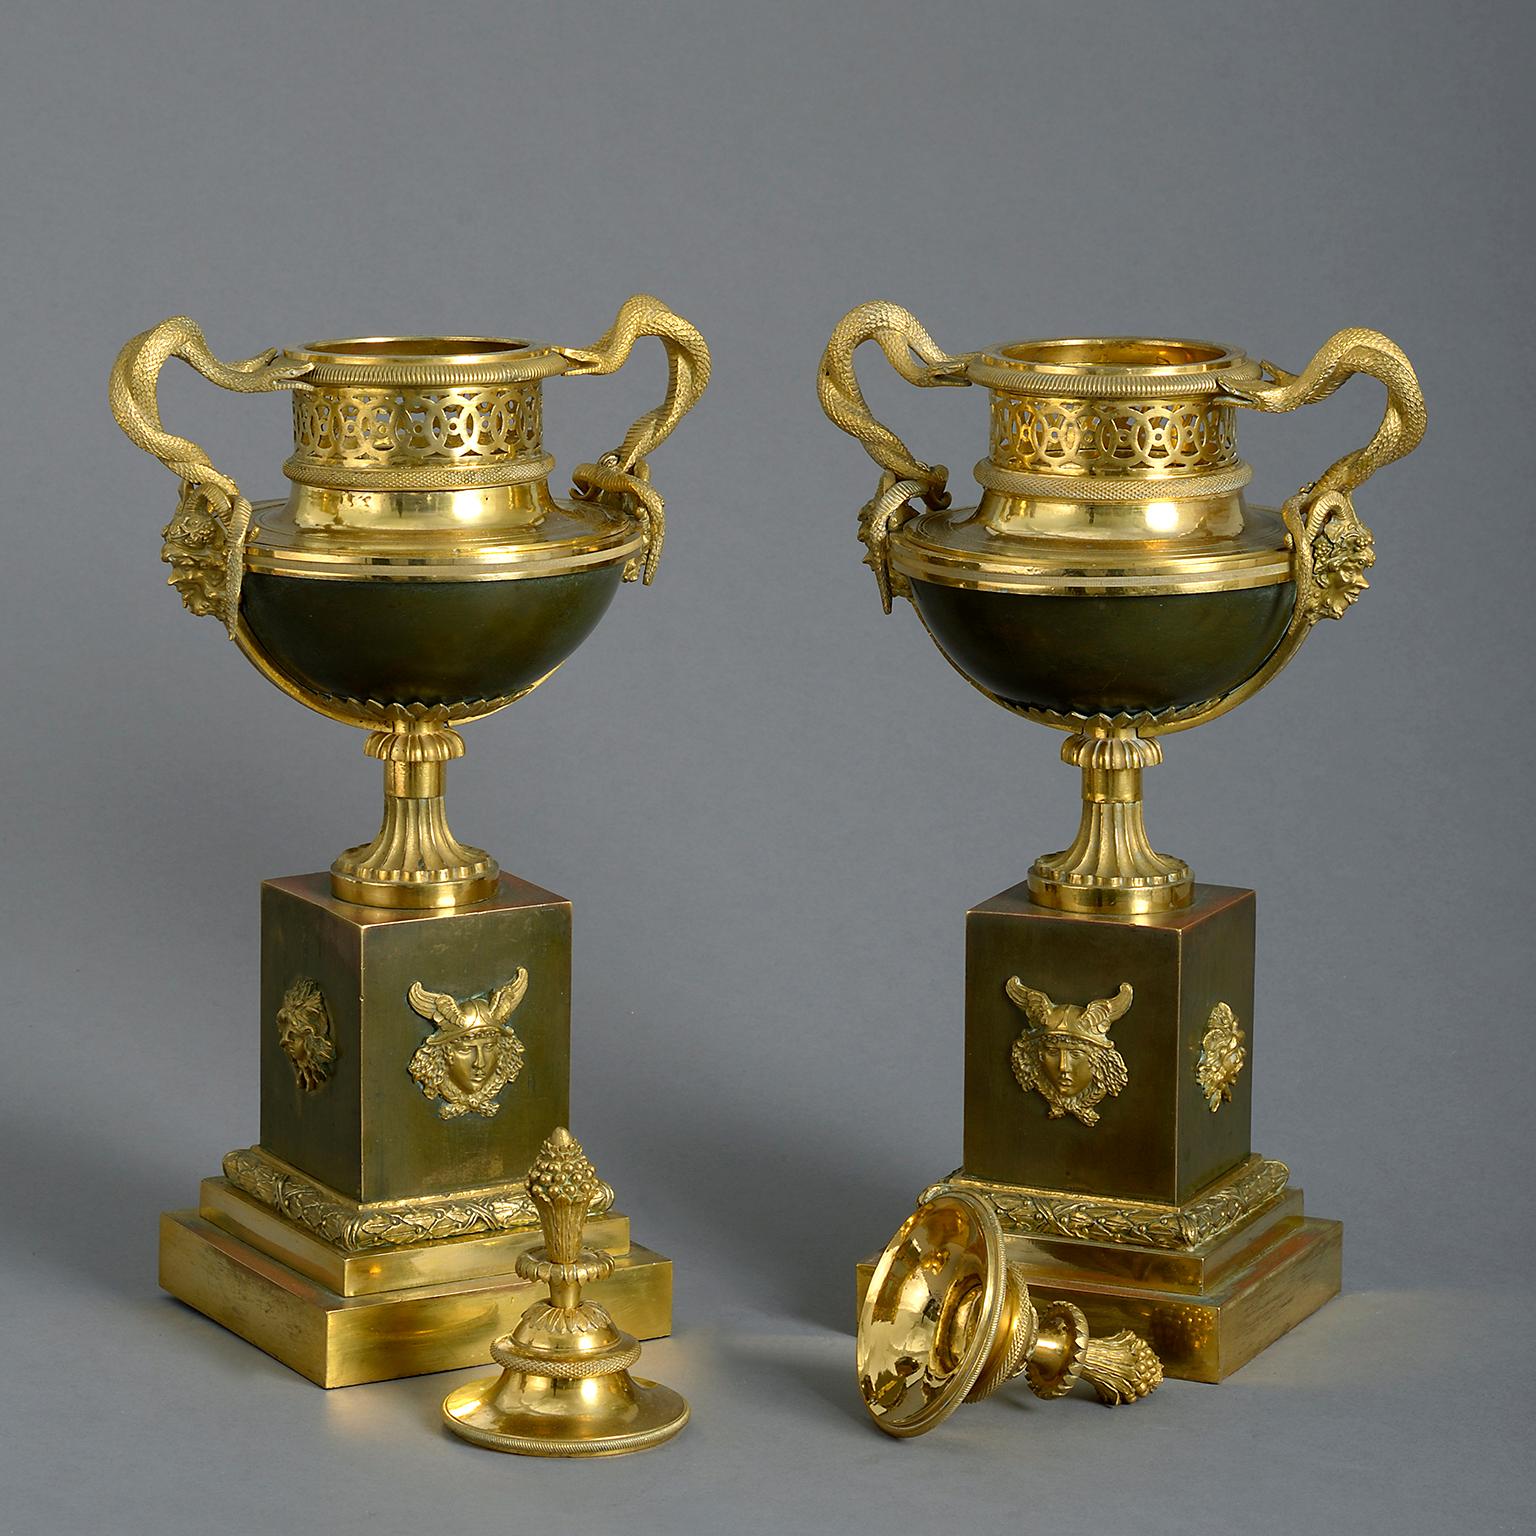 French Early 19th Century Pair of Bronze and Ormolu Perfume Burners or Pot-Pourri Vases